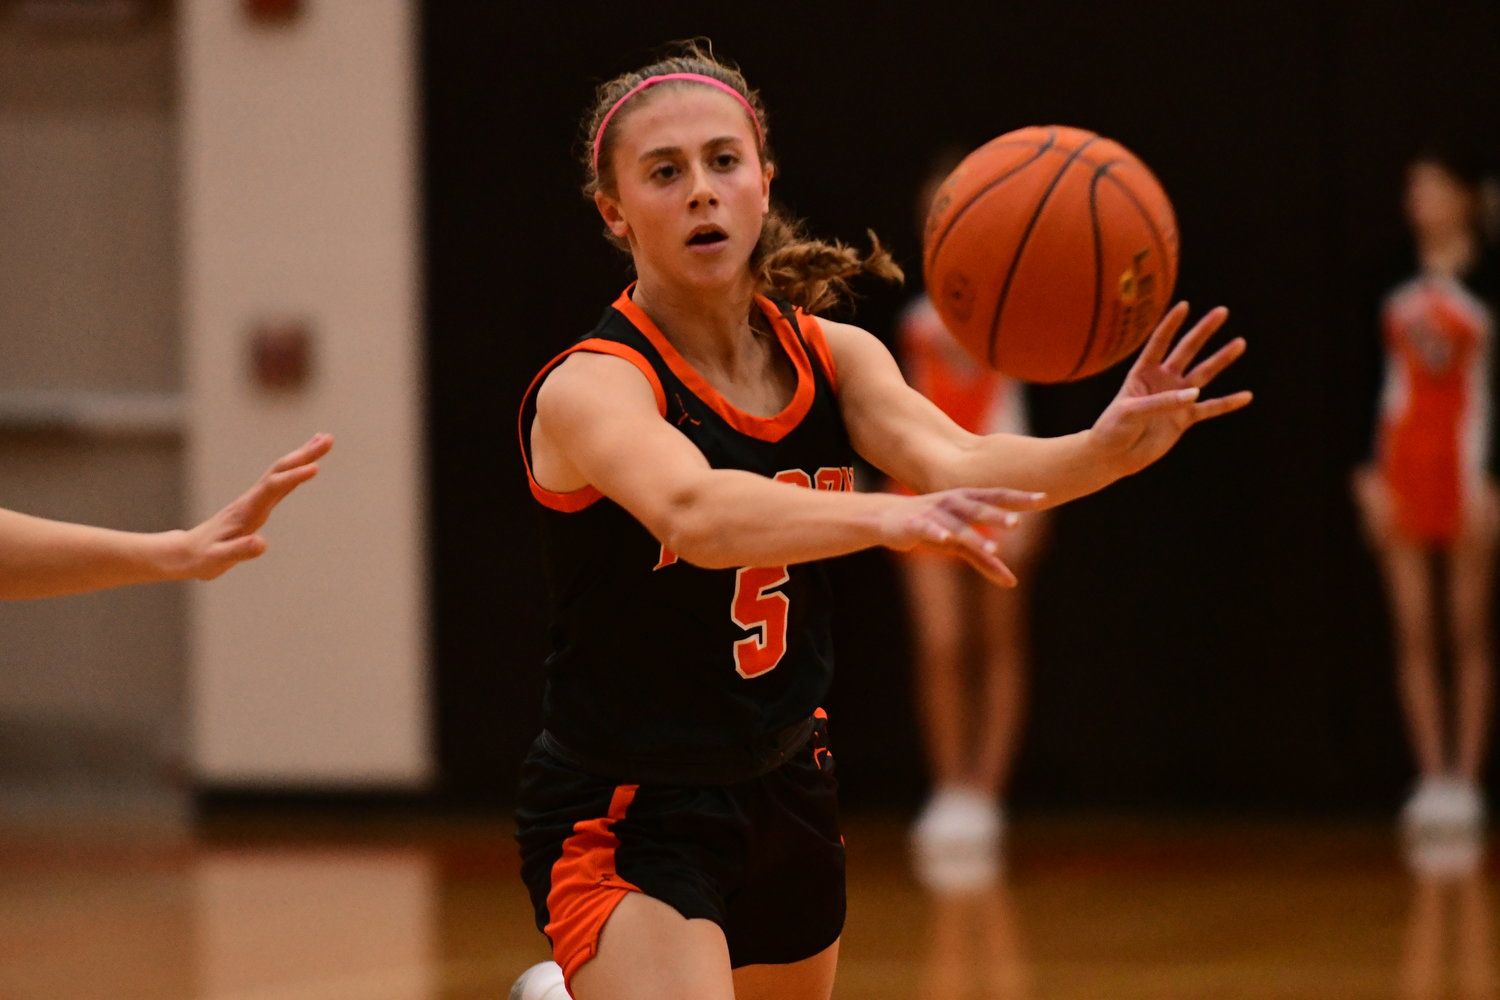 Action from Tuesday's girls basketball game between Kirksville and Macon.